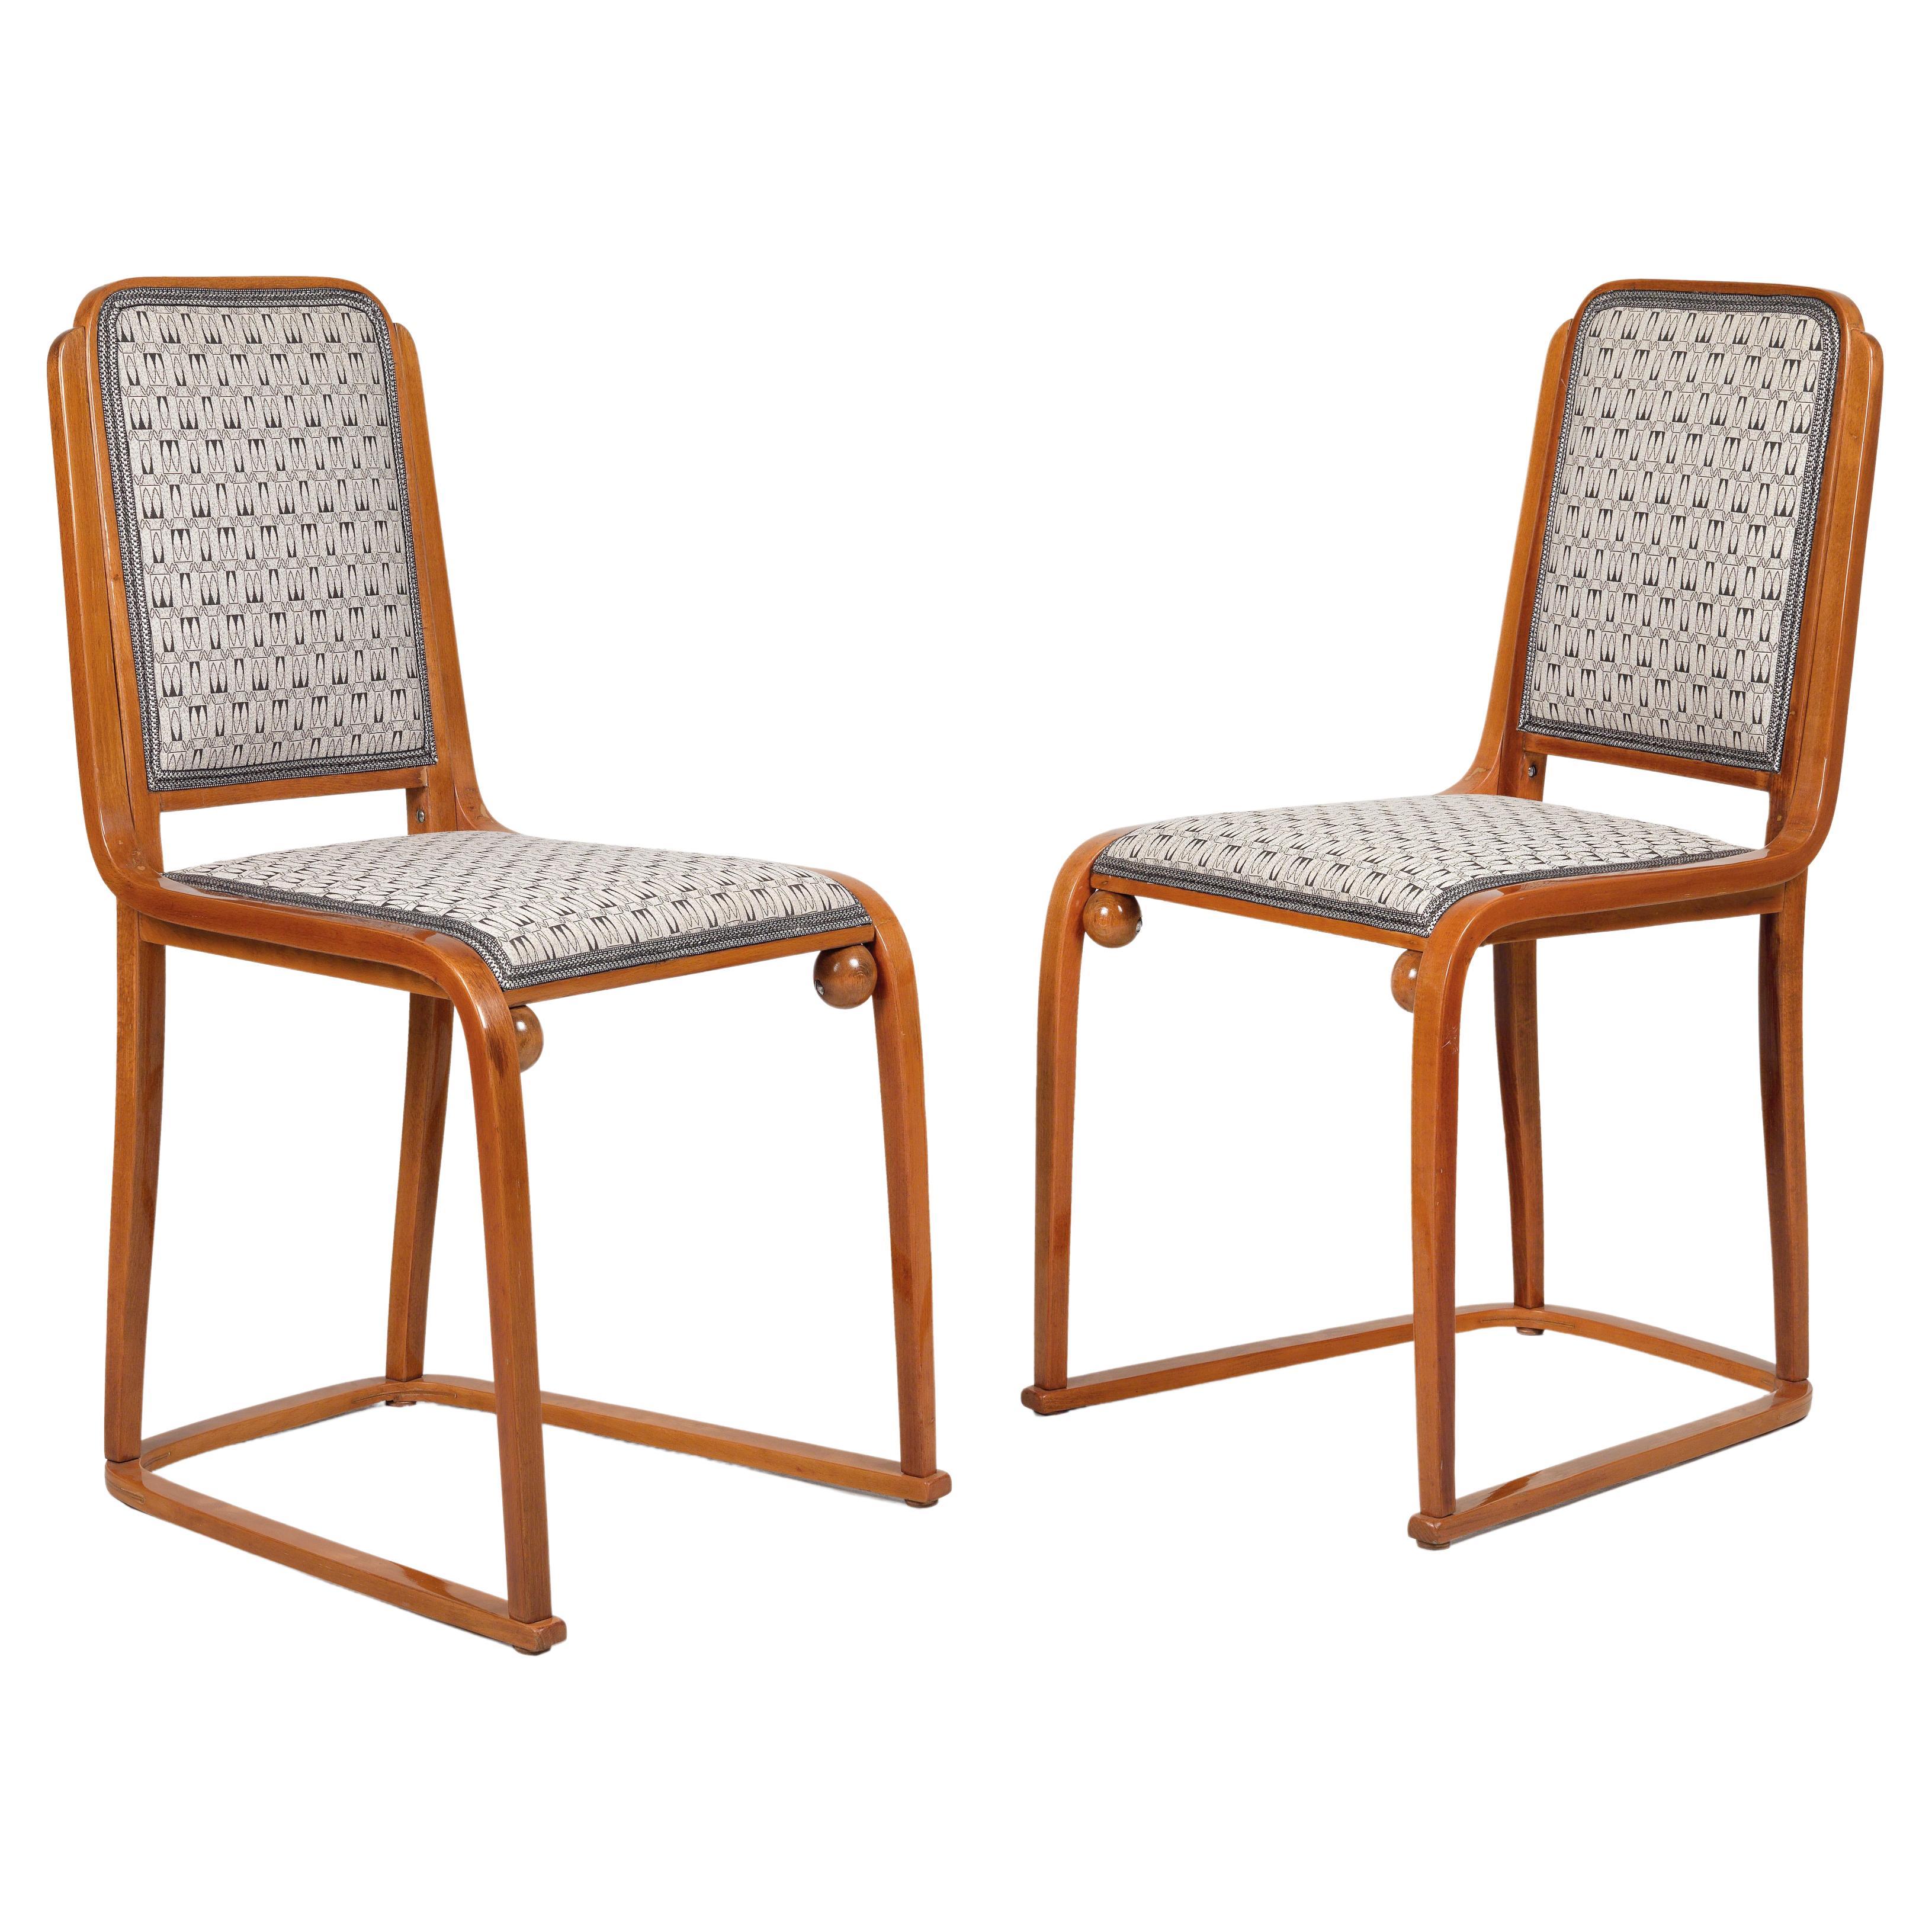 Originals 1905 of the Period Pair of Josef Hoffmann and Jacob &Josef Kohn Chairs For Sale